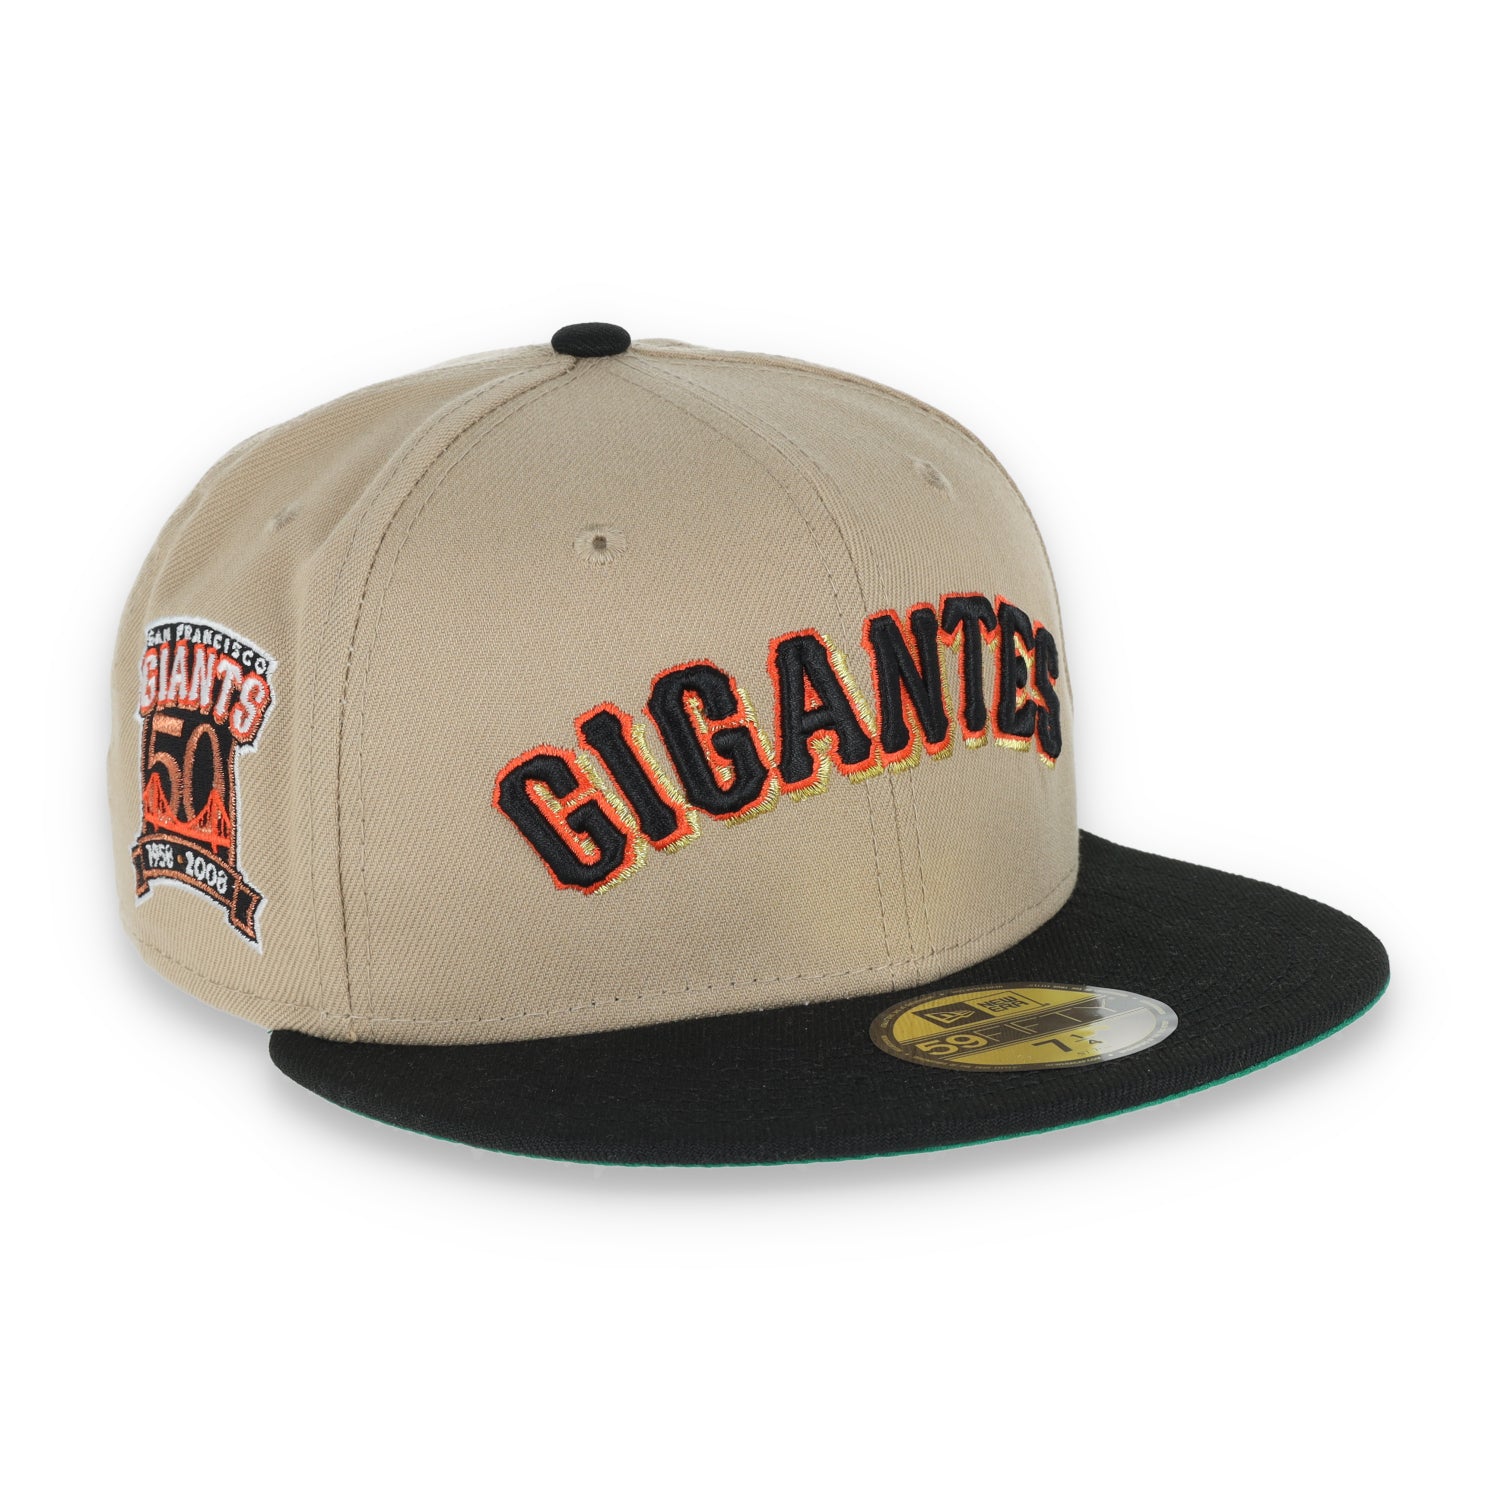 New Era San Francisco Giants "Gigantes" 1958-2008 50th Anniversary Side Patch 59FIFTY Fitted Khaki Hat